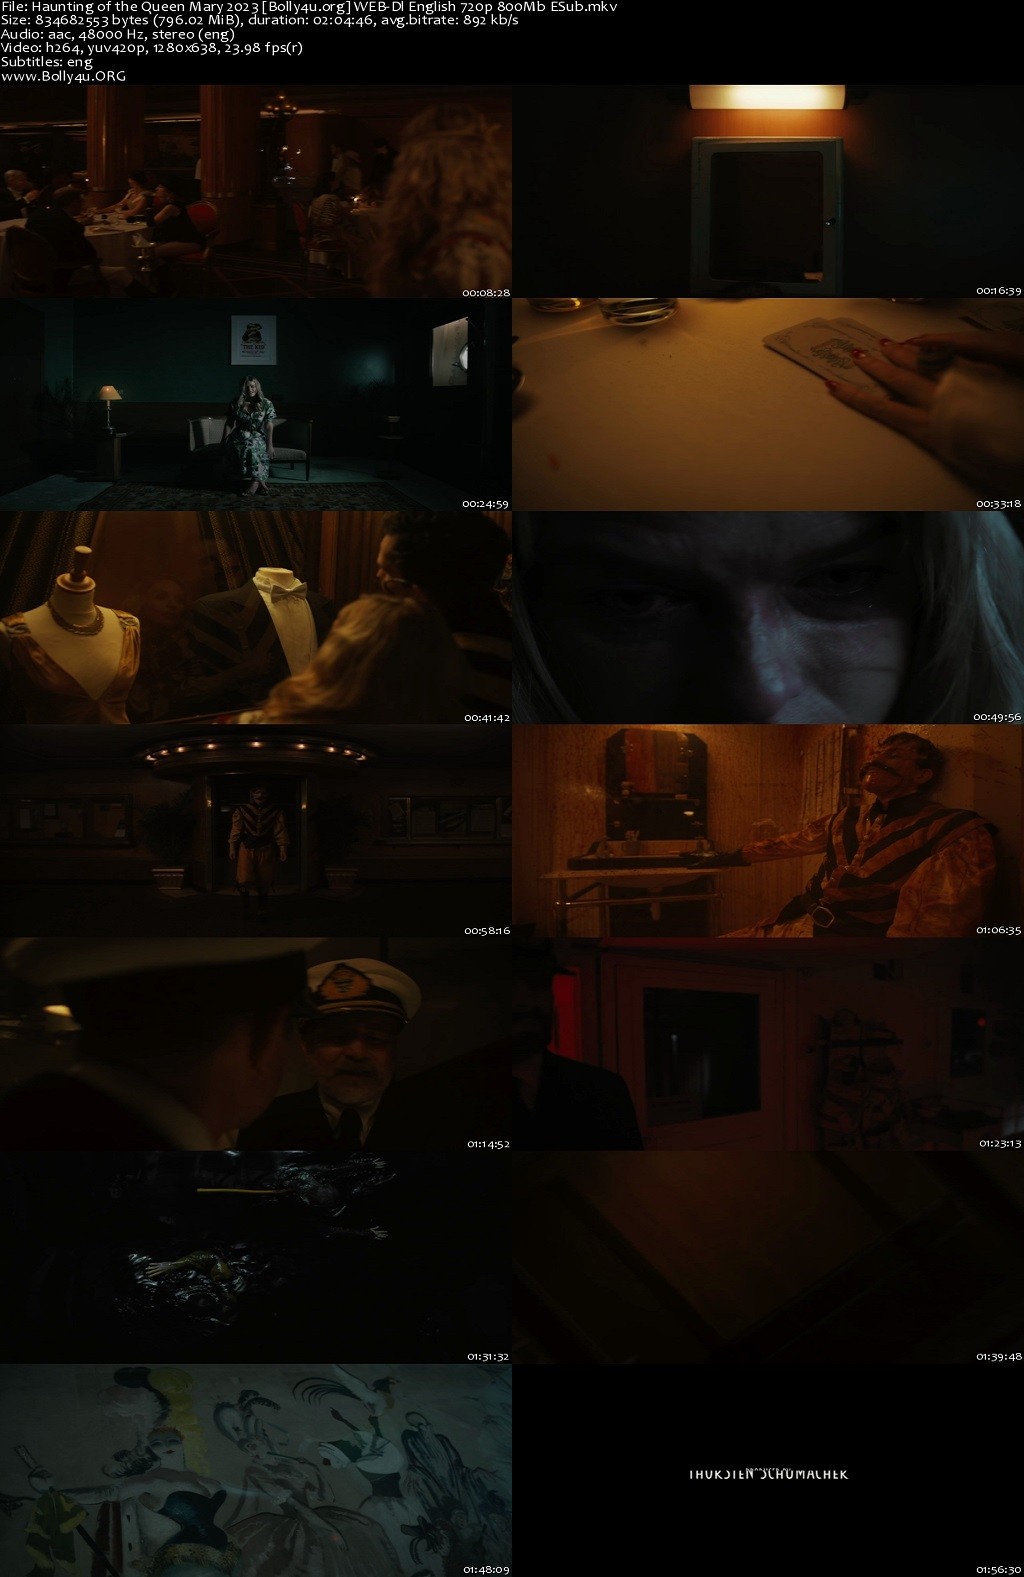 18+ Haunting of the Queen Mary 2023 WEB-DL English Full Movie Download 720p 480p